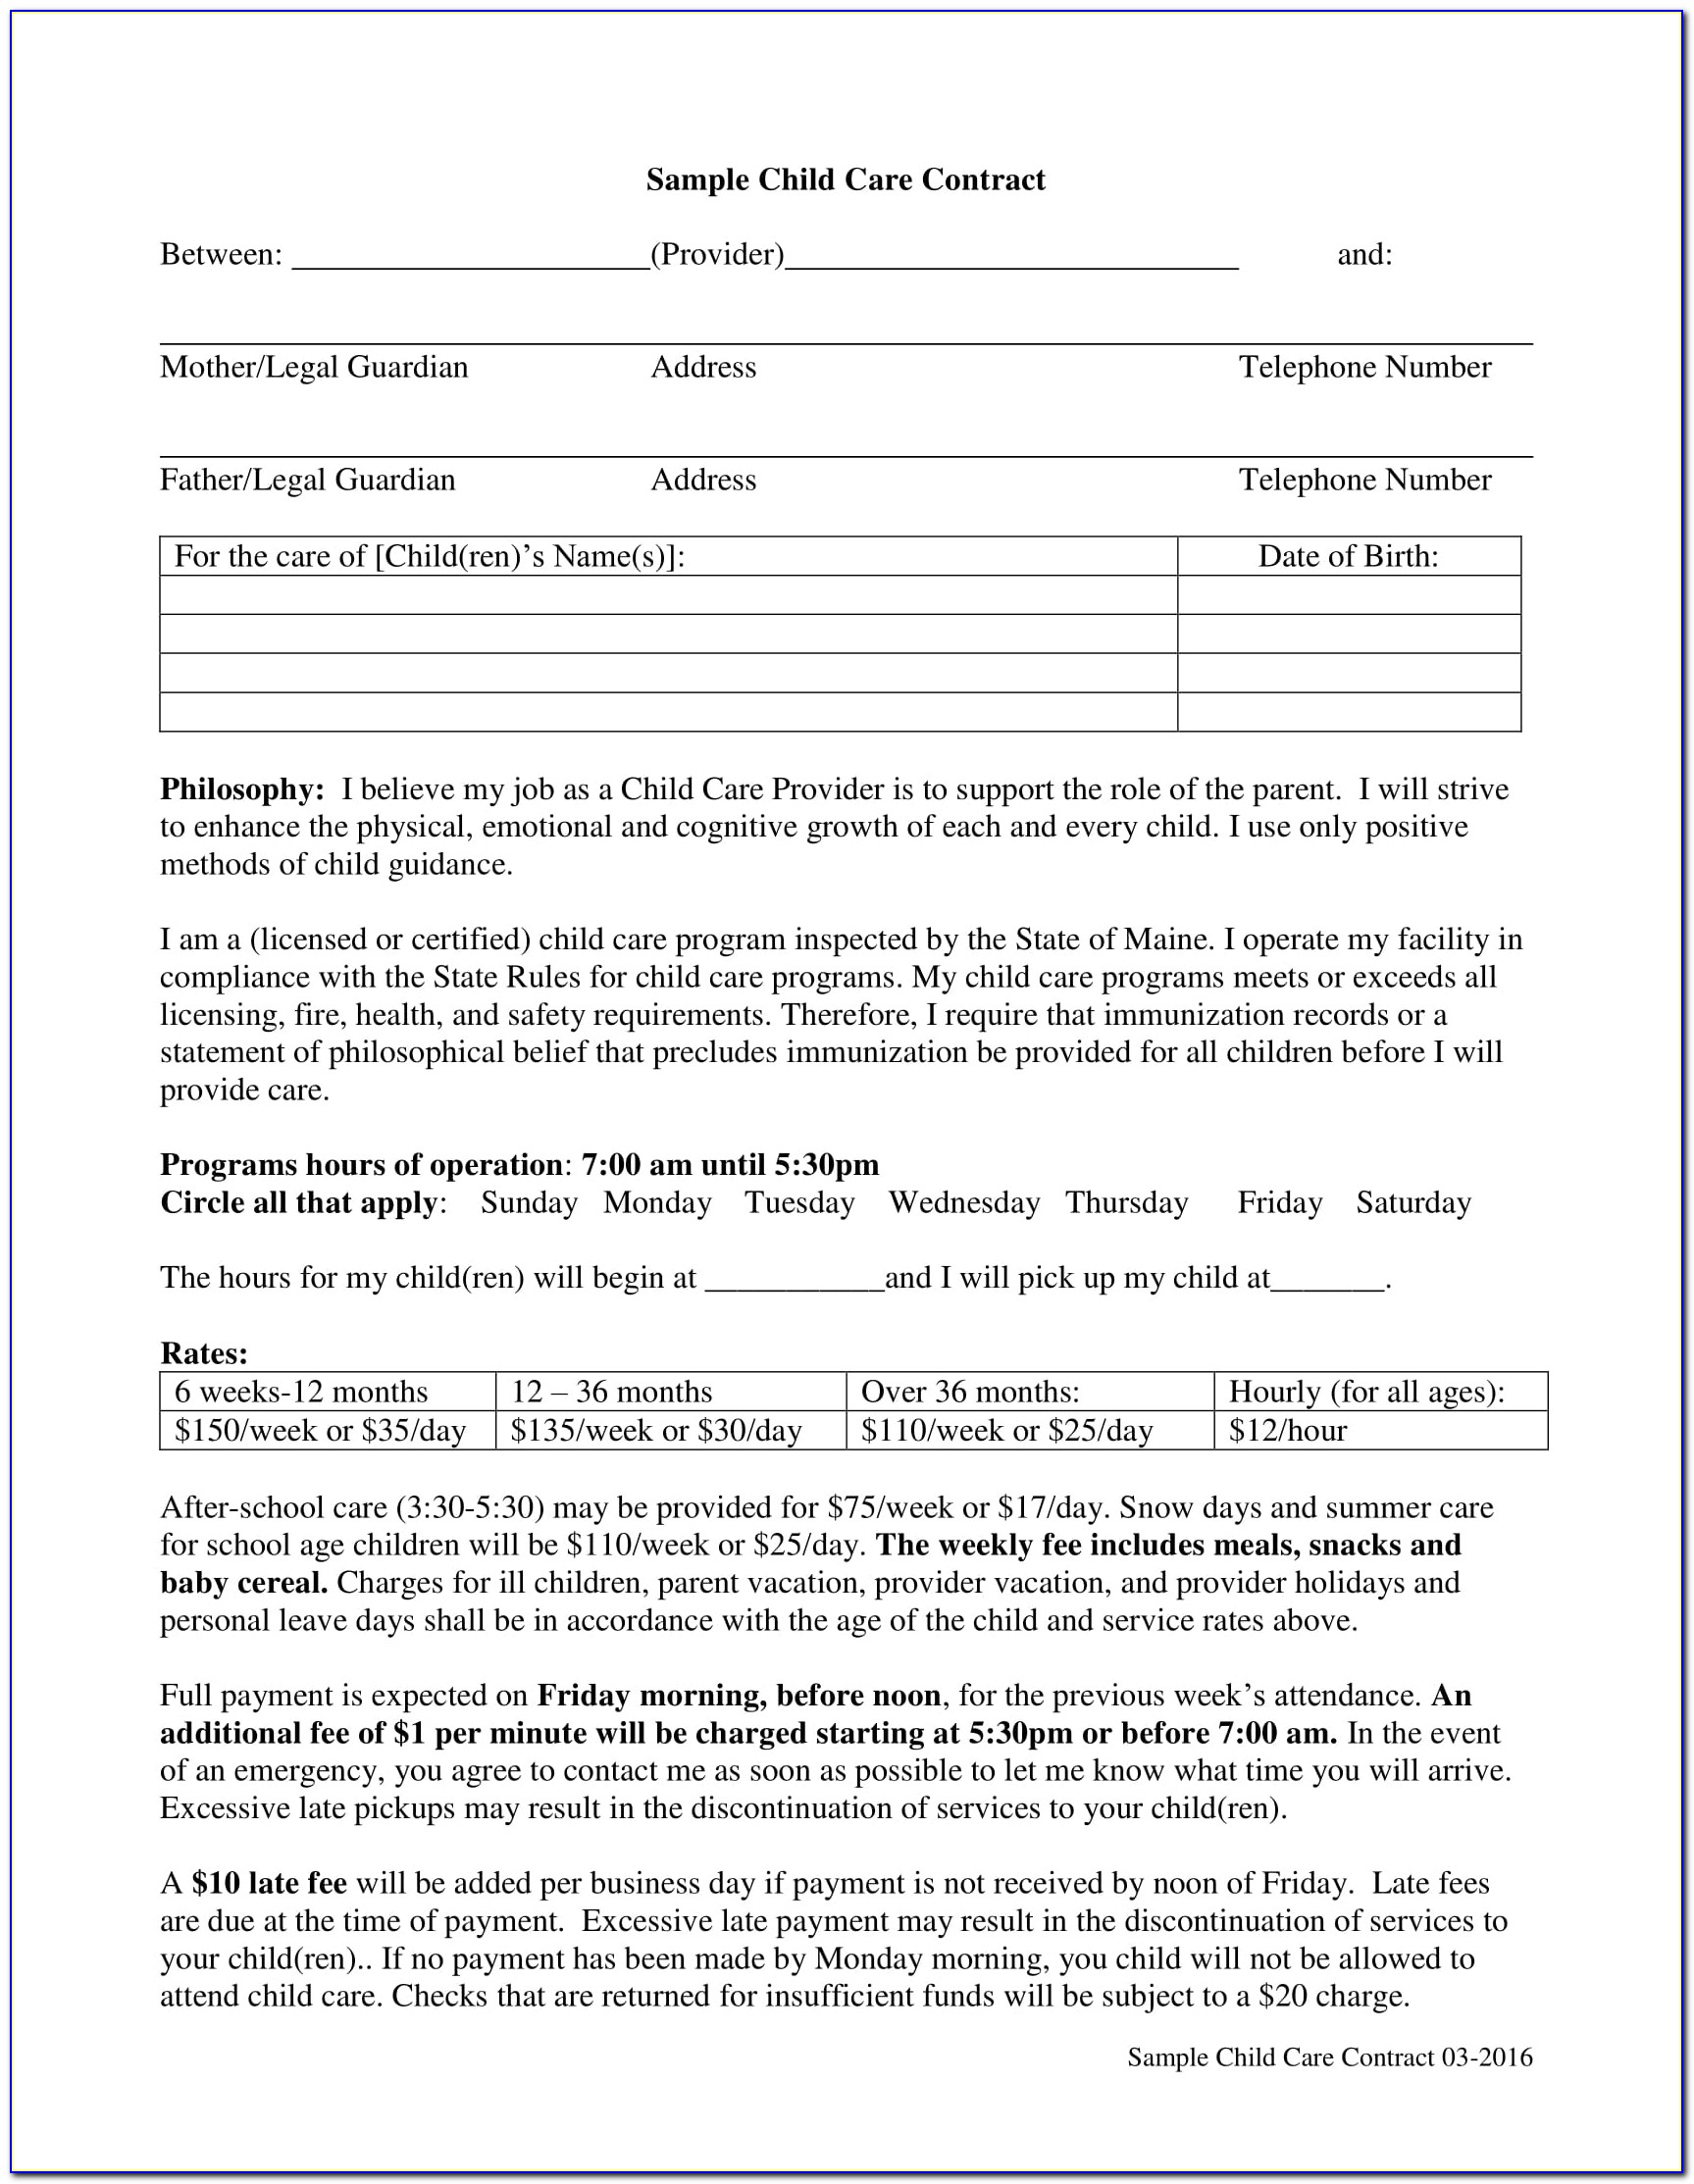 Child Care Agreement Contract Sample